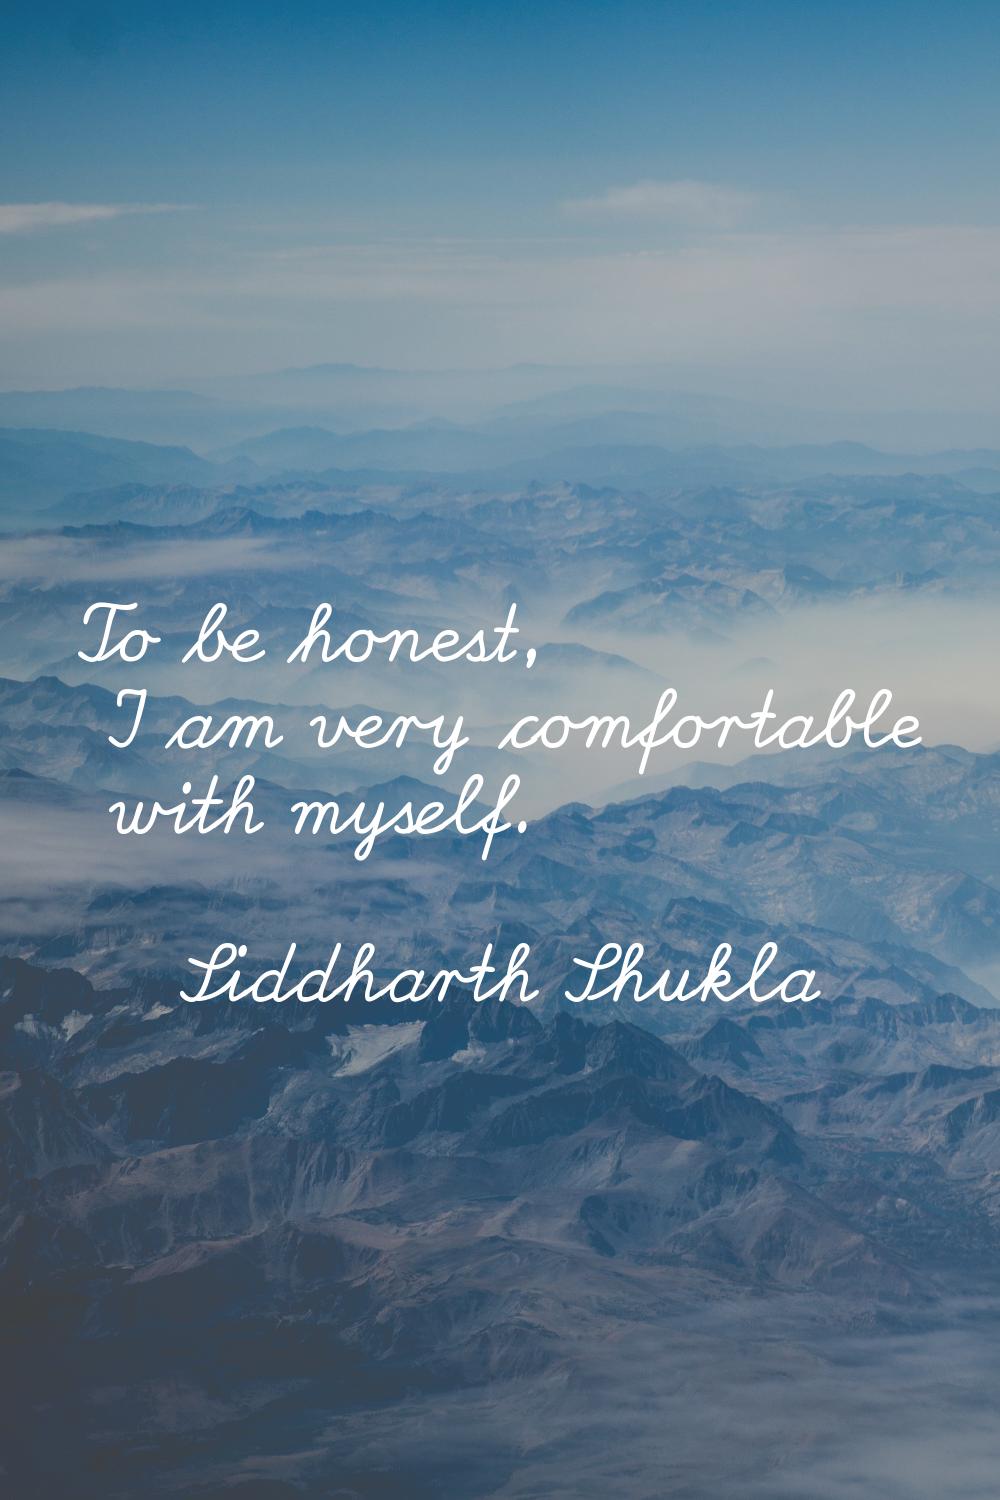 To be honest, I am very comfortable with myself.